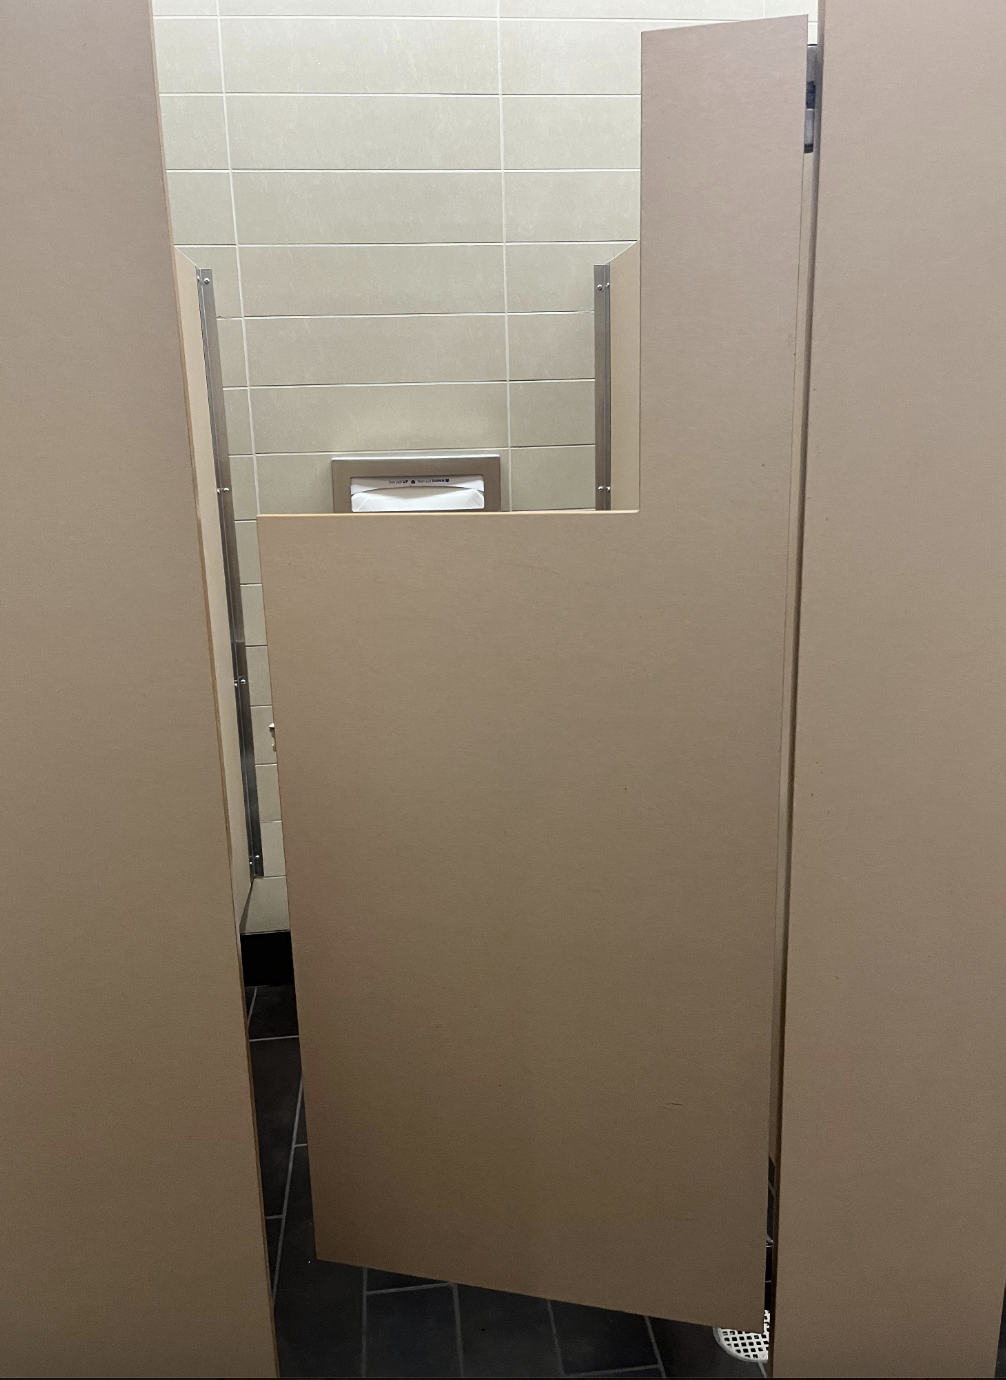 Bathroom stall with a door cut to fit around a high toilet paper dispenser, revealing the lack of privacy